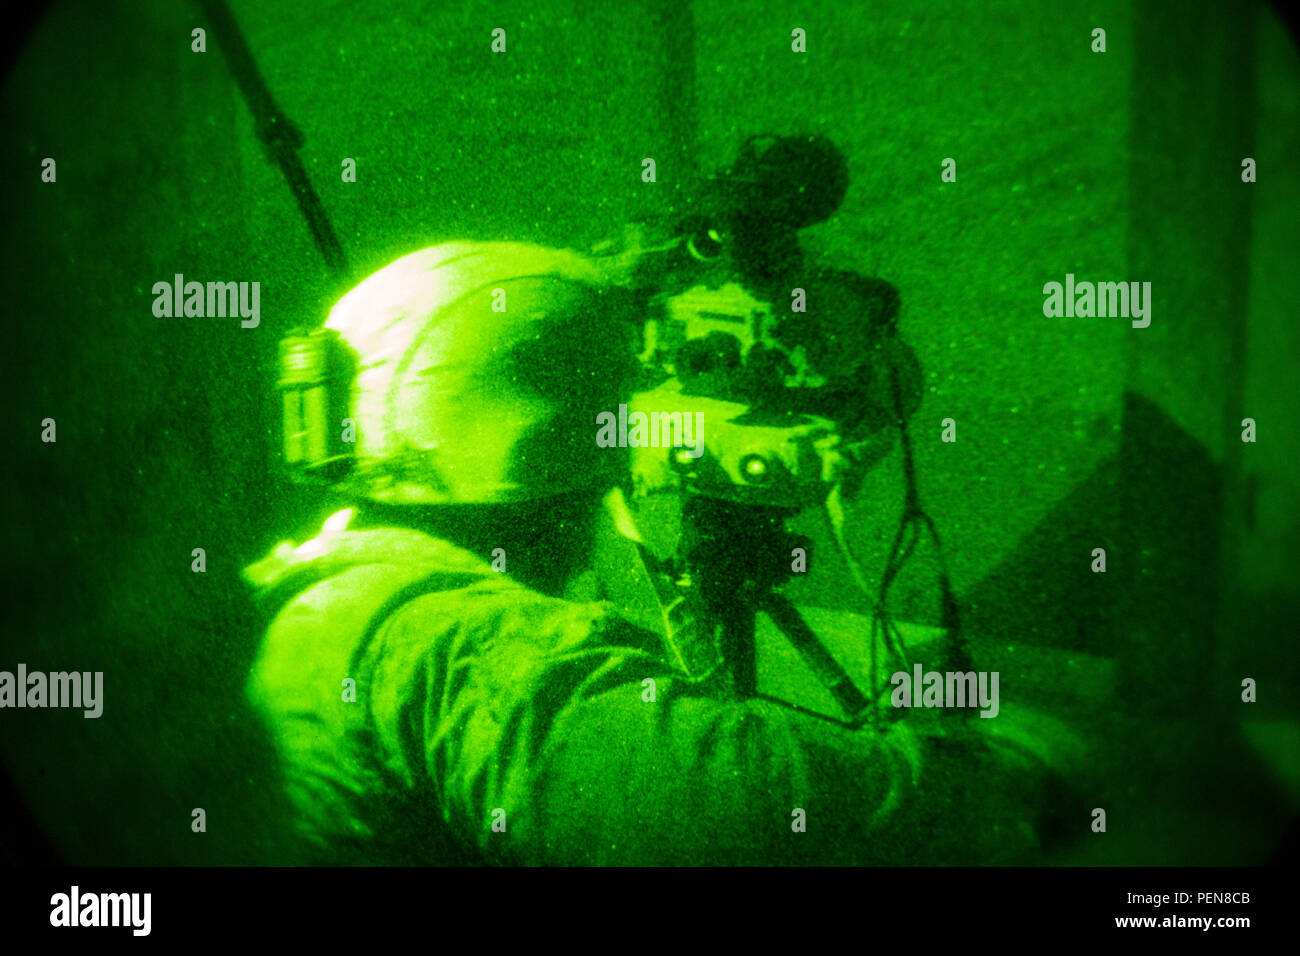 U.S. Marine Corps Cpl. Sheldon Muse, radio operator, with 1st Air Naval  Gunfire Liaison Company, Special Purpose Marine Air-Ground Task Force-Crisis  Response-Central Command, uses an AN/PAS-25 thermal laser spot imager to  locate